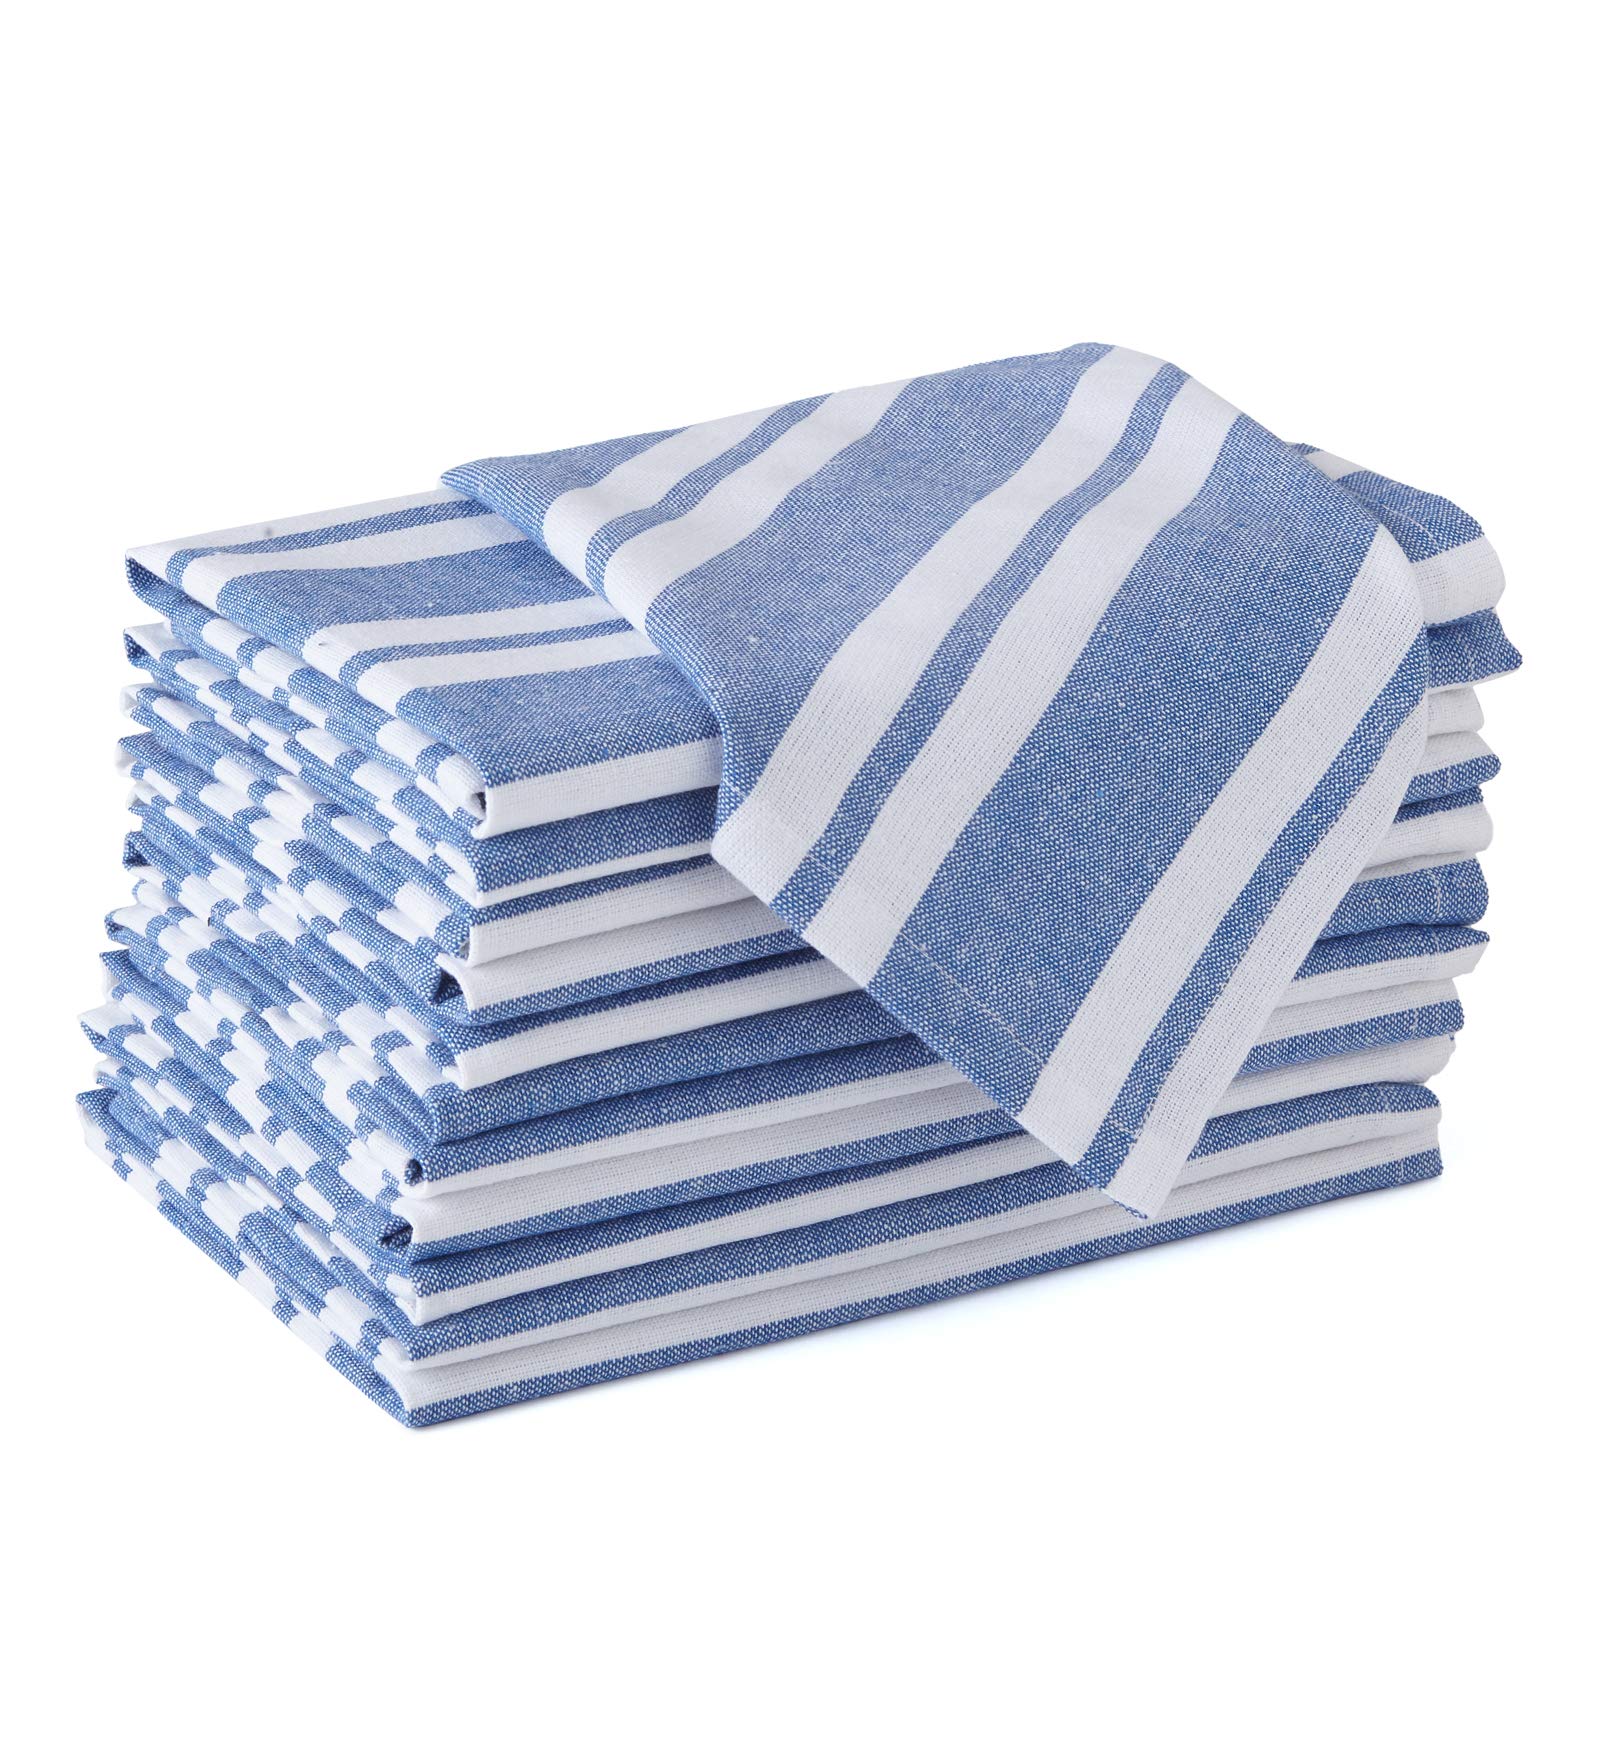 Encasa Homes Dining Table Napkins 12 pcs Set of Large 43 x 43 cm (17 x 17 inch) - Stripes (Fat/Thin) - Blue - Absorbent Heavy Cotton Party Fabric Machine Washable for Home Restaurant Banquet & Hotel